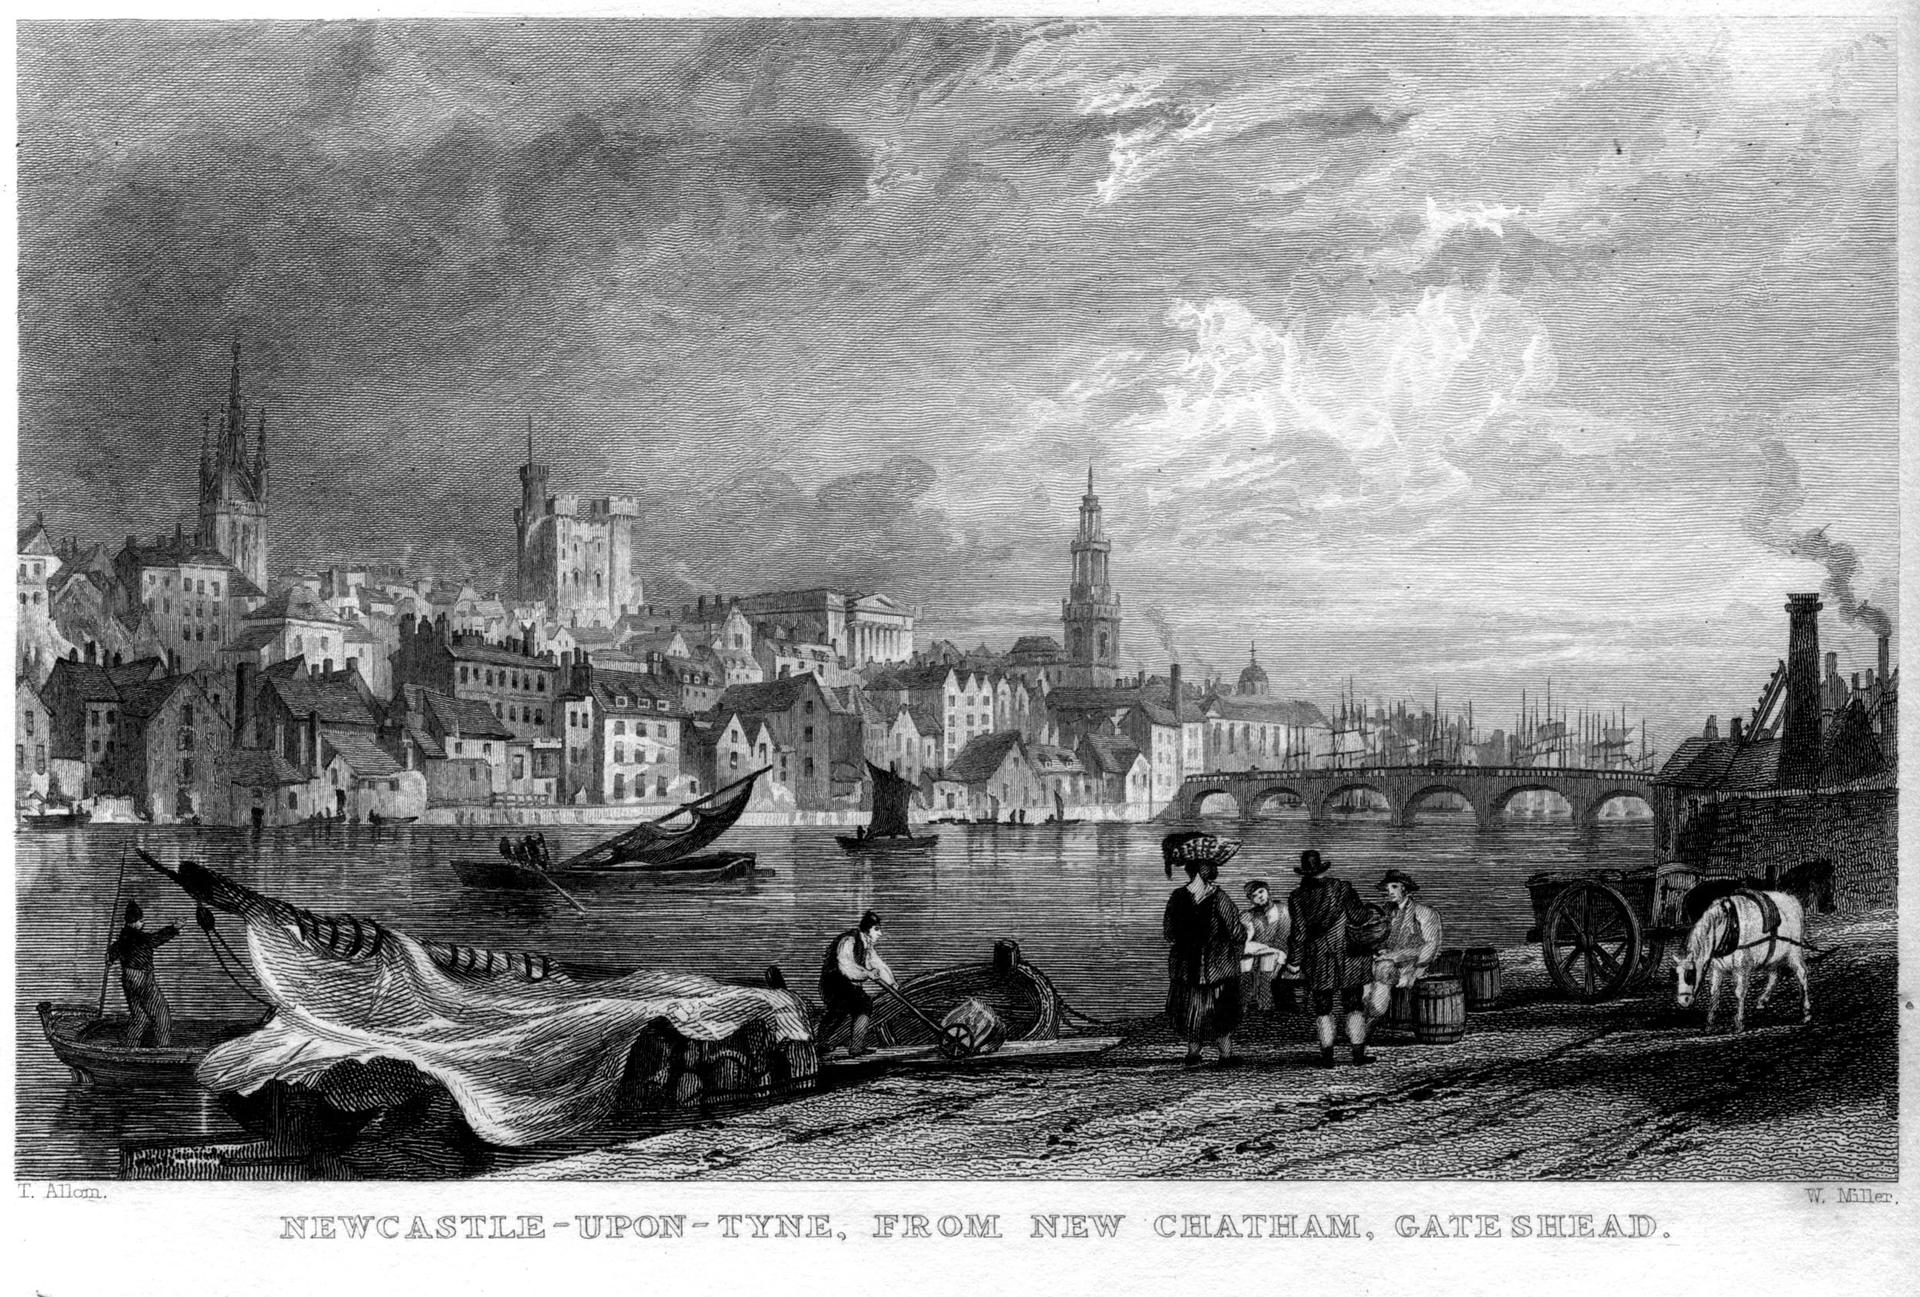 An engraving by William Miller of Newcastle in 1832